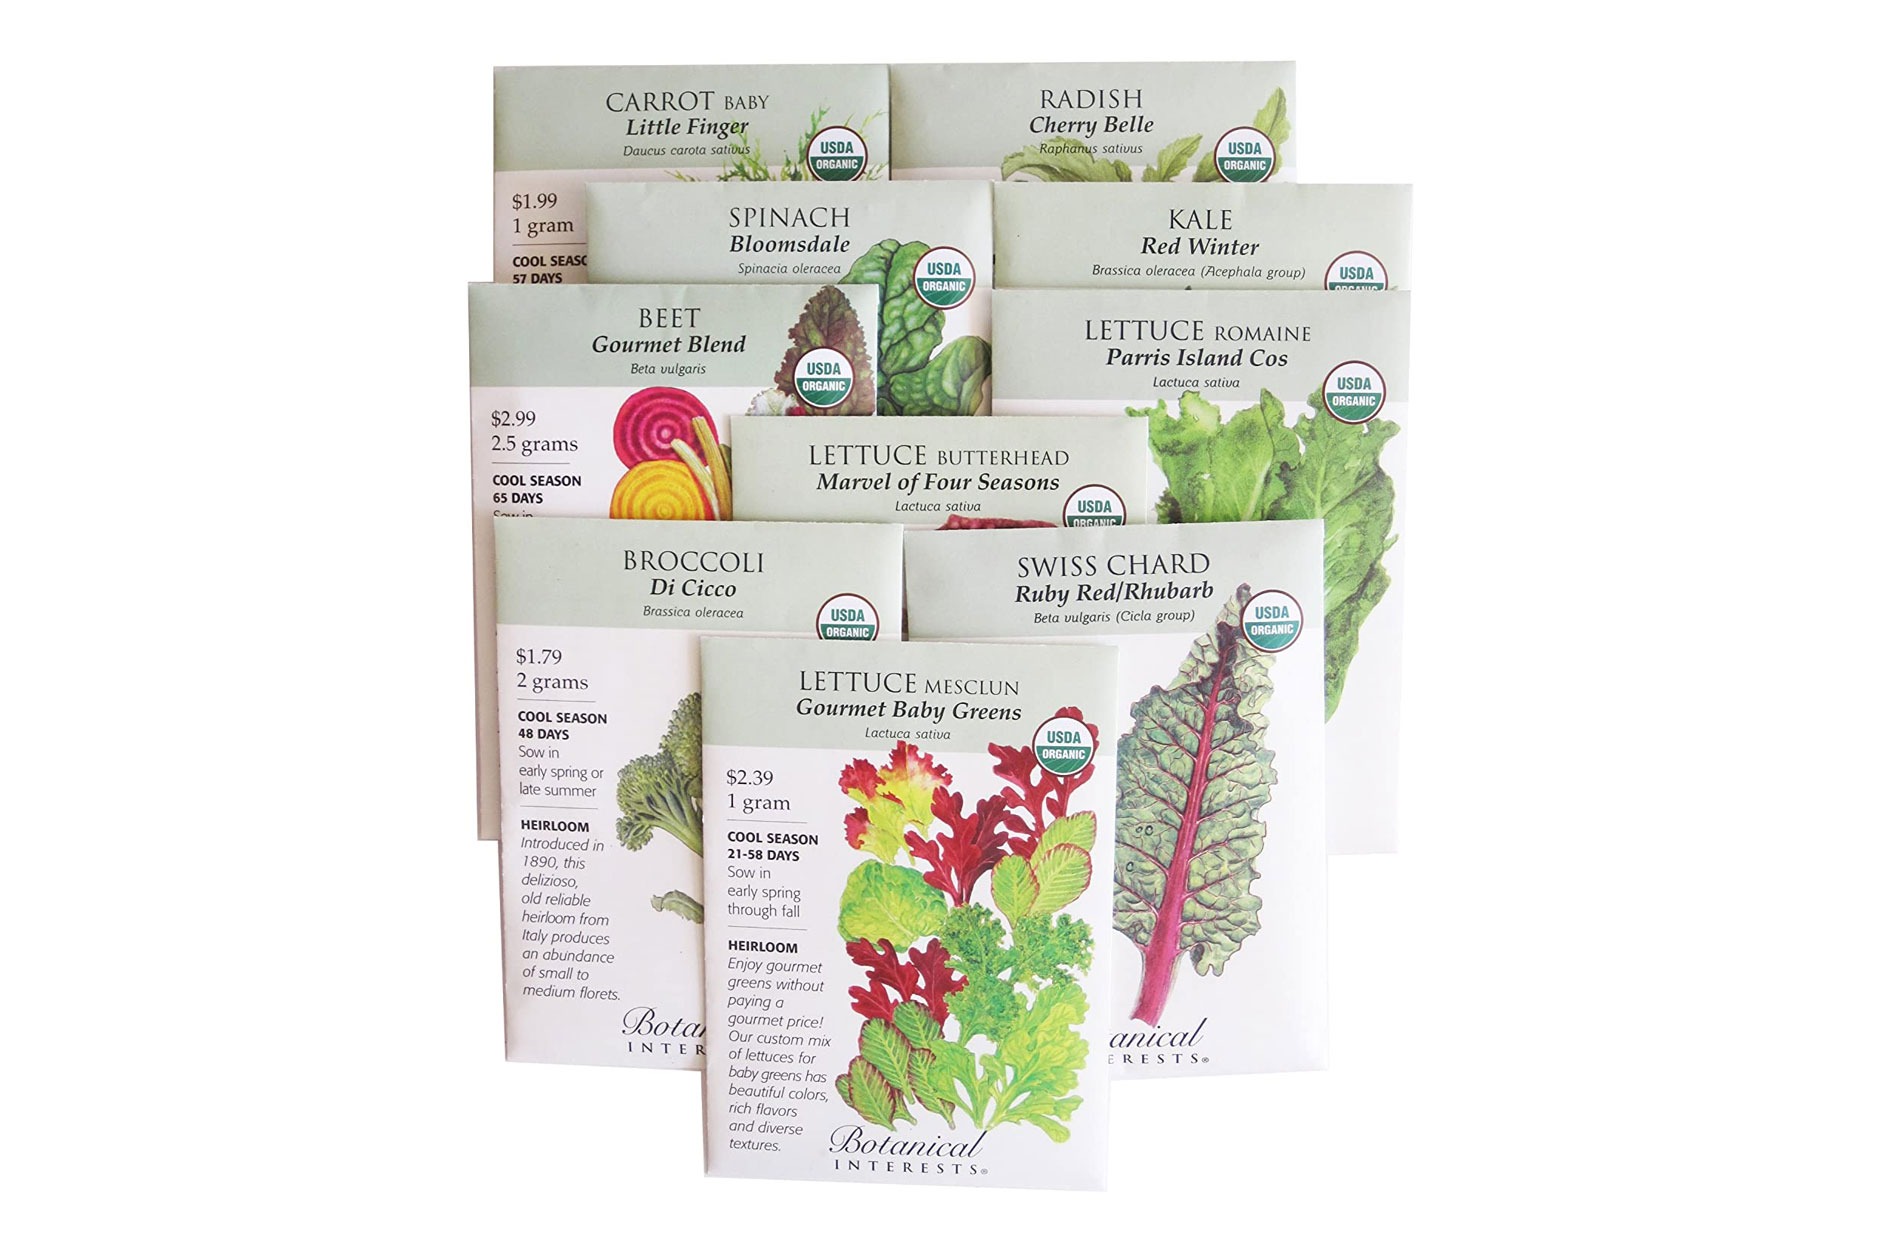 "Fall Back" 10 Organic Vegetable Seeds to Plant in Late Summer By Botanical Interests in Gift Box